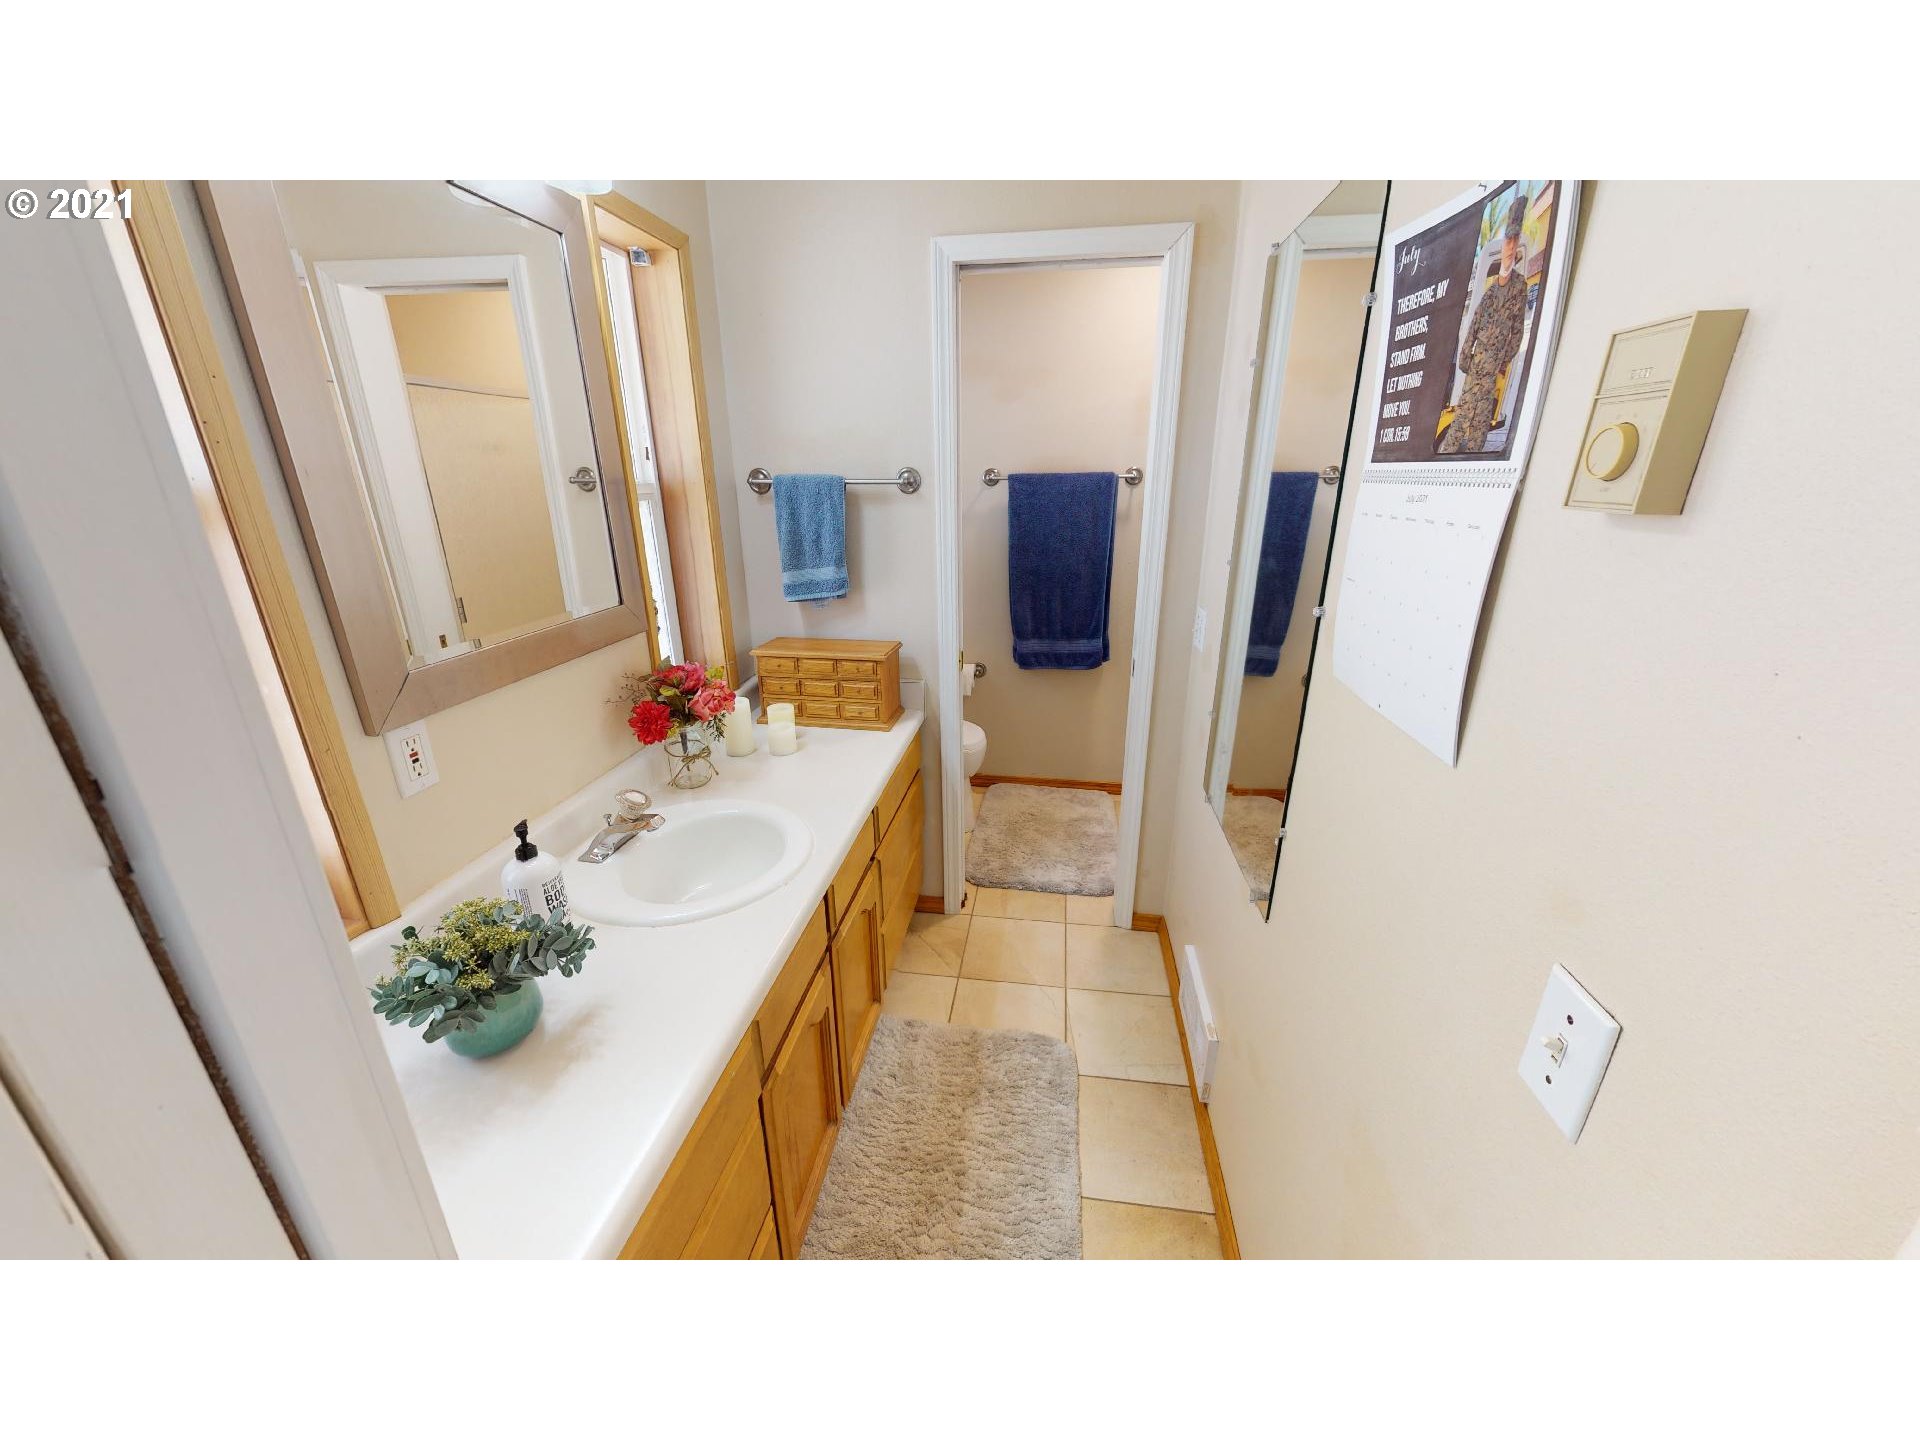 Bathroom, Attached